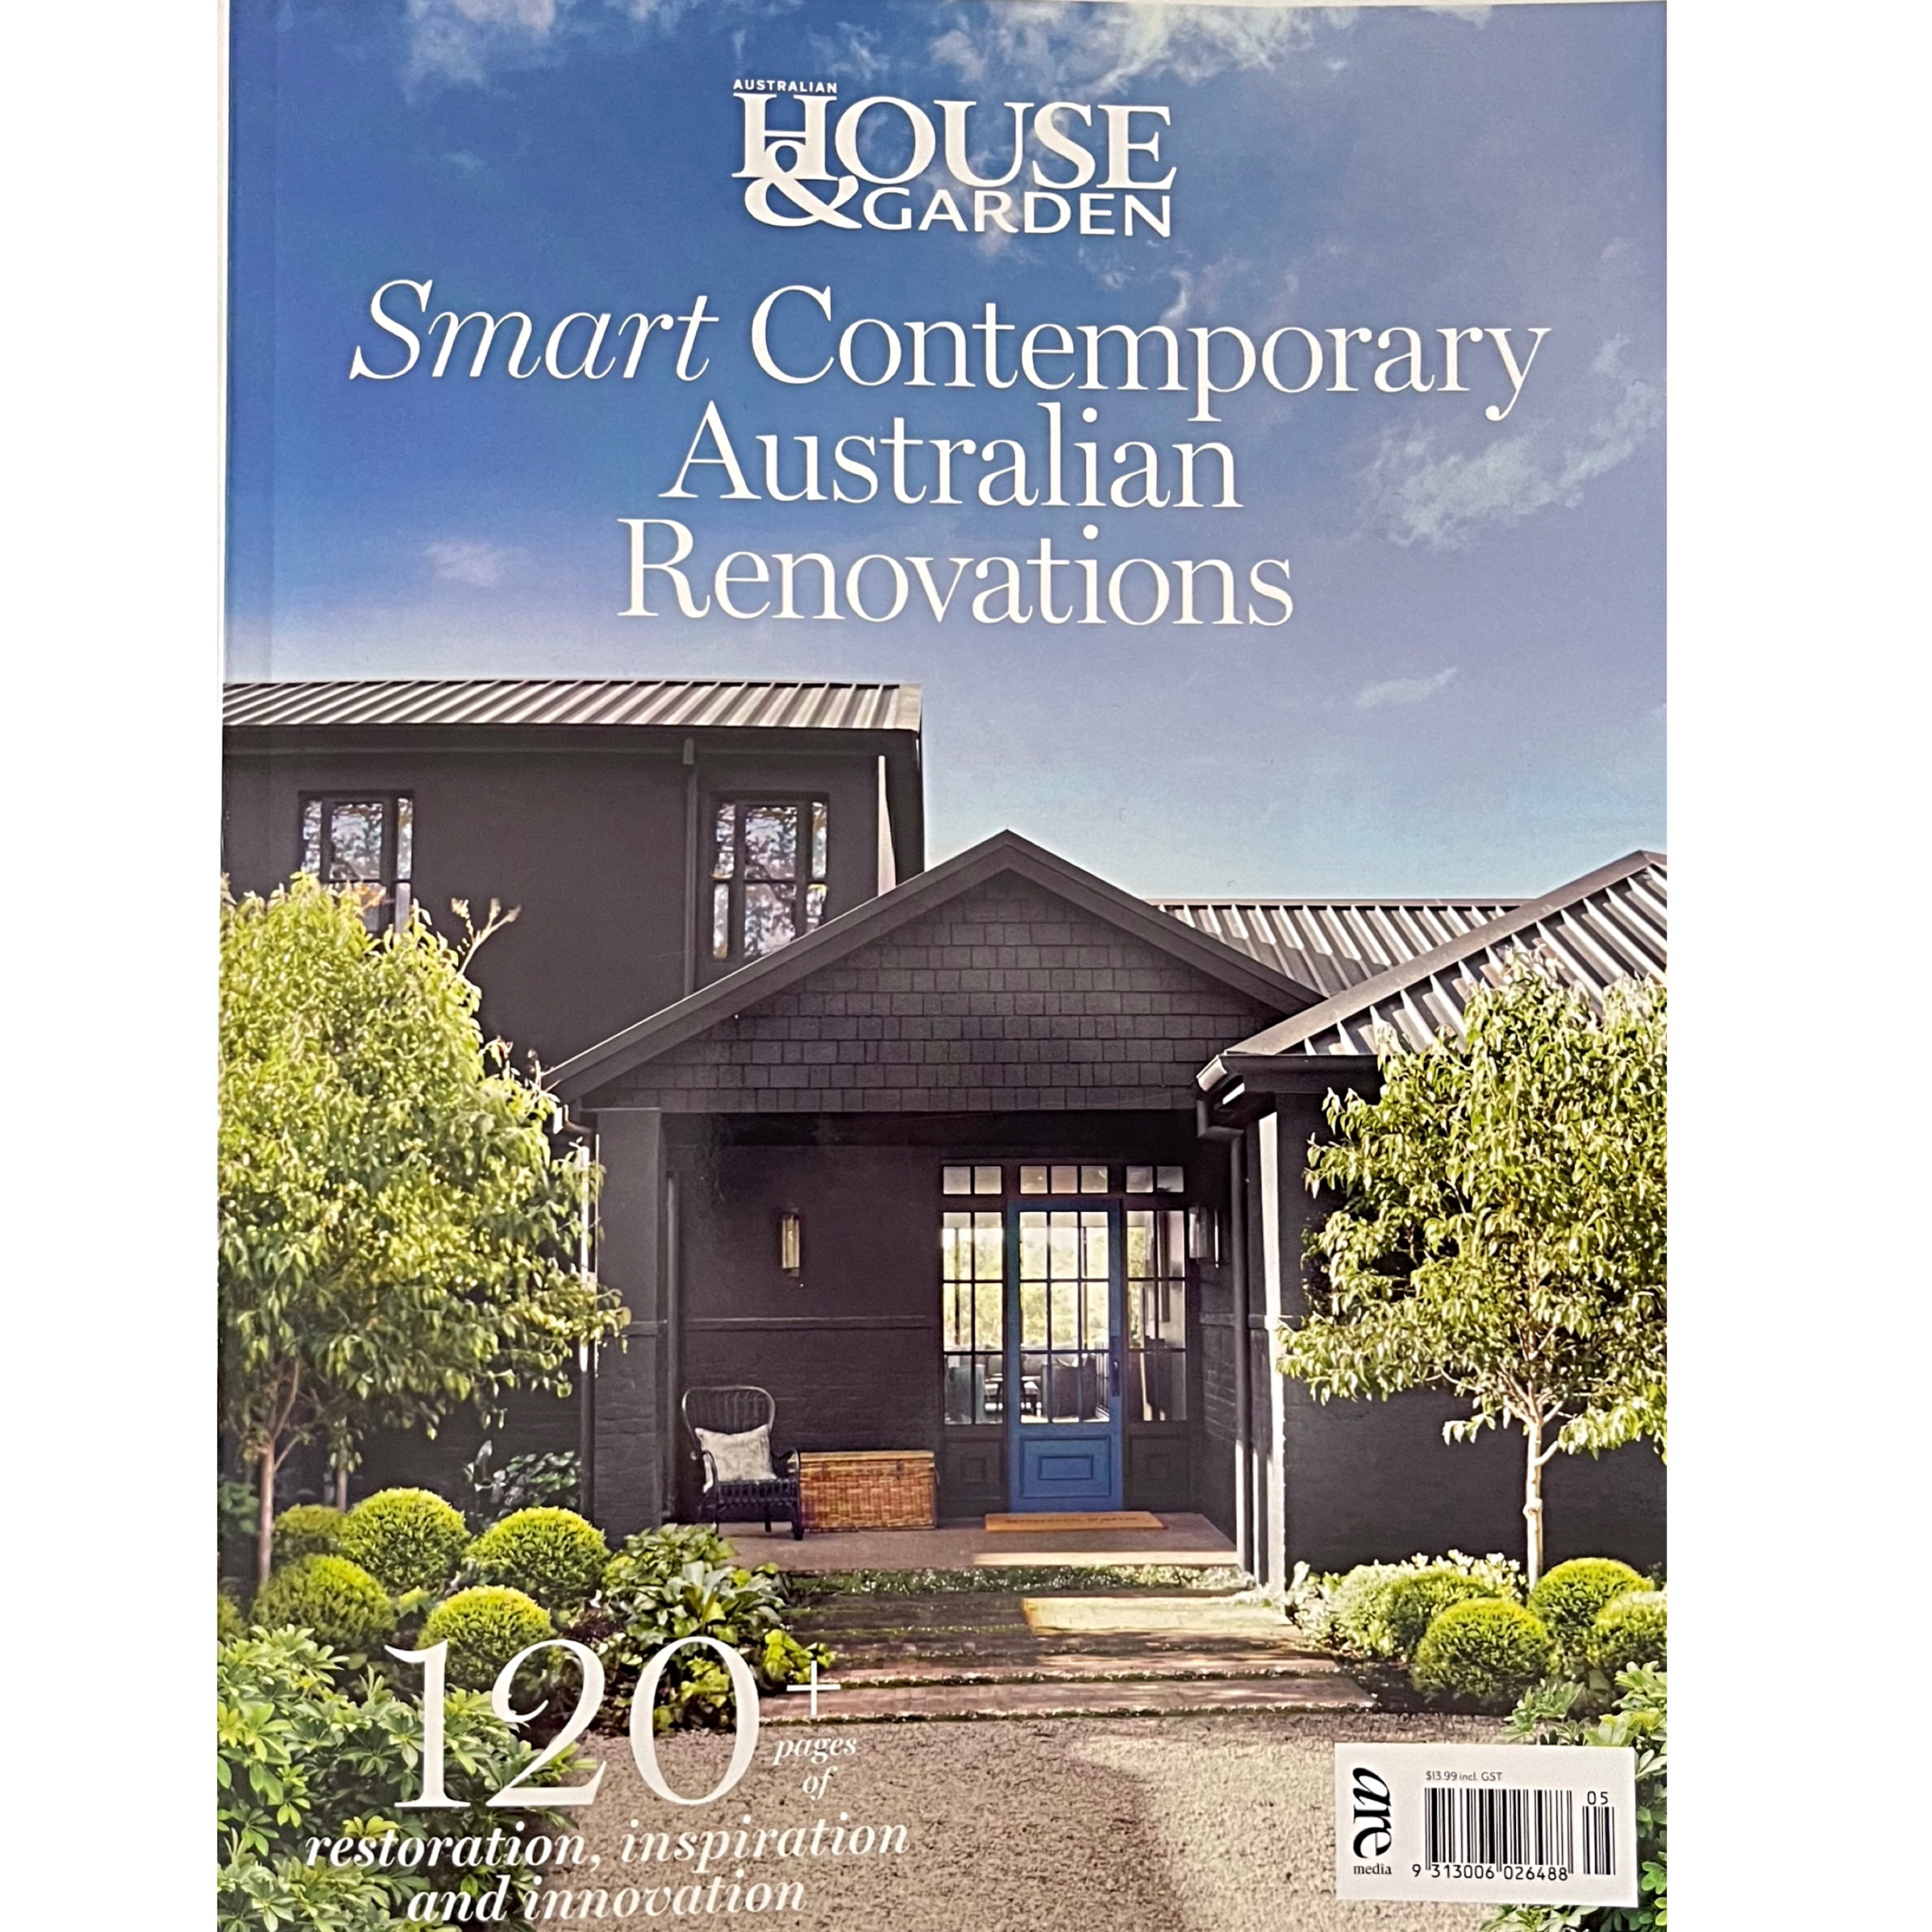 Designer Sparks Interiors are in February 2023 issue of House and Garden Smart Contemporary Australian Renovations -